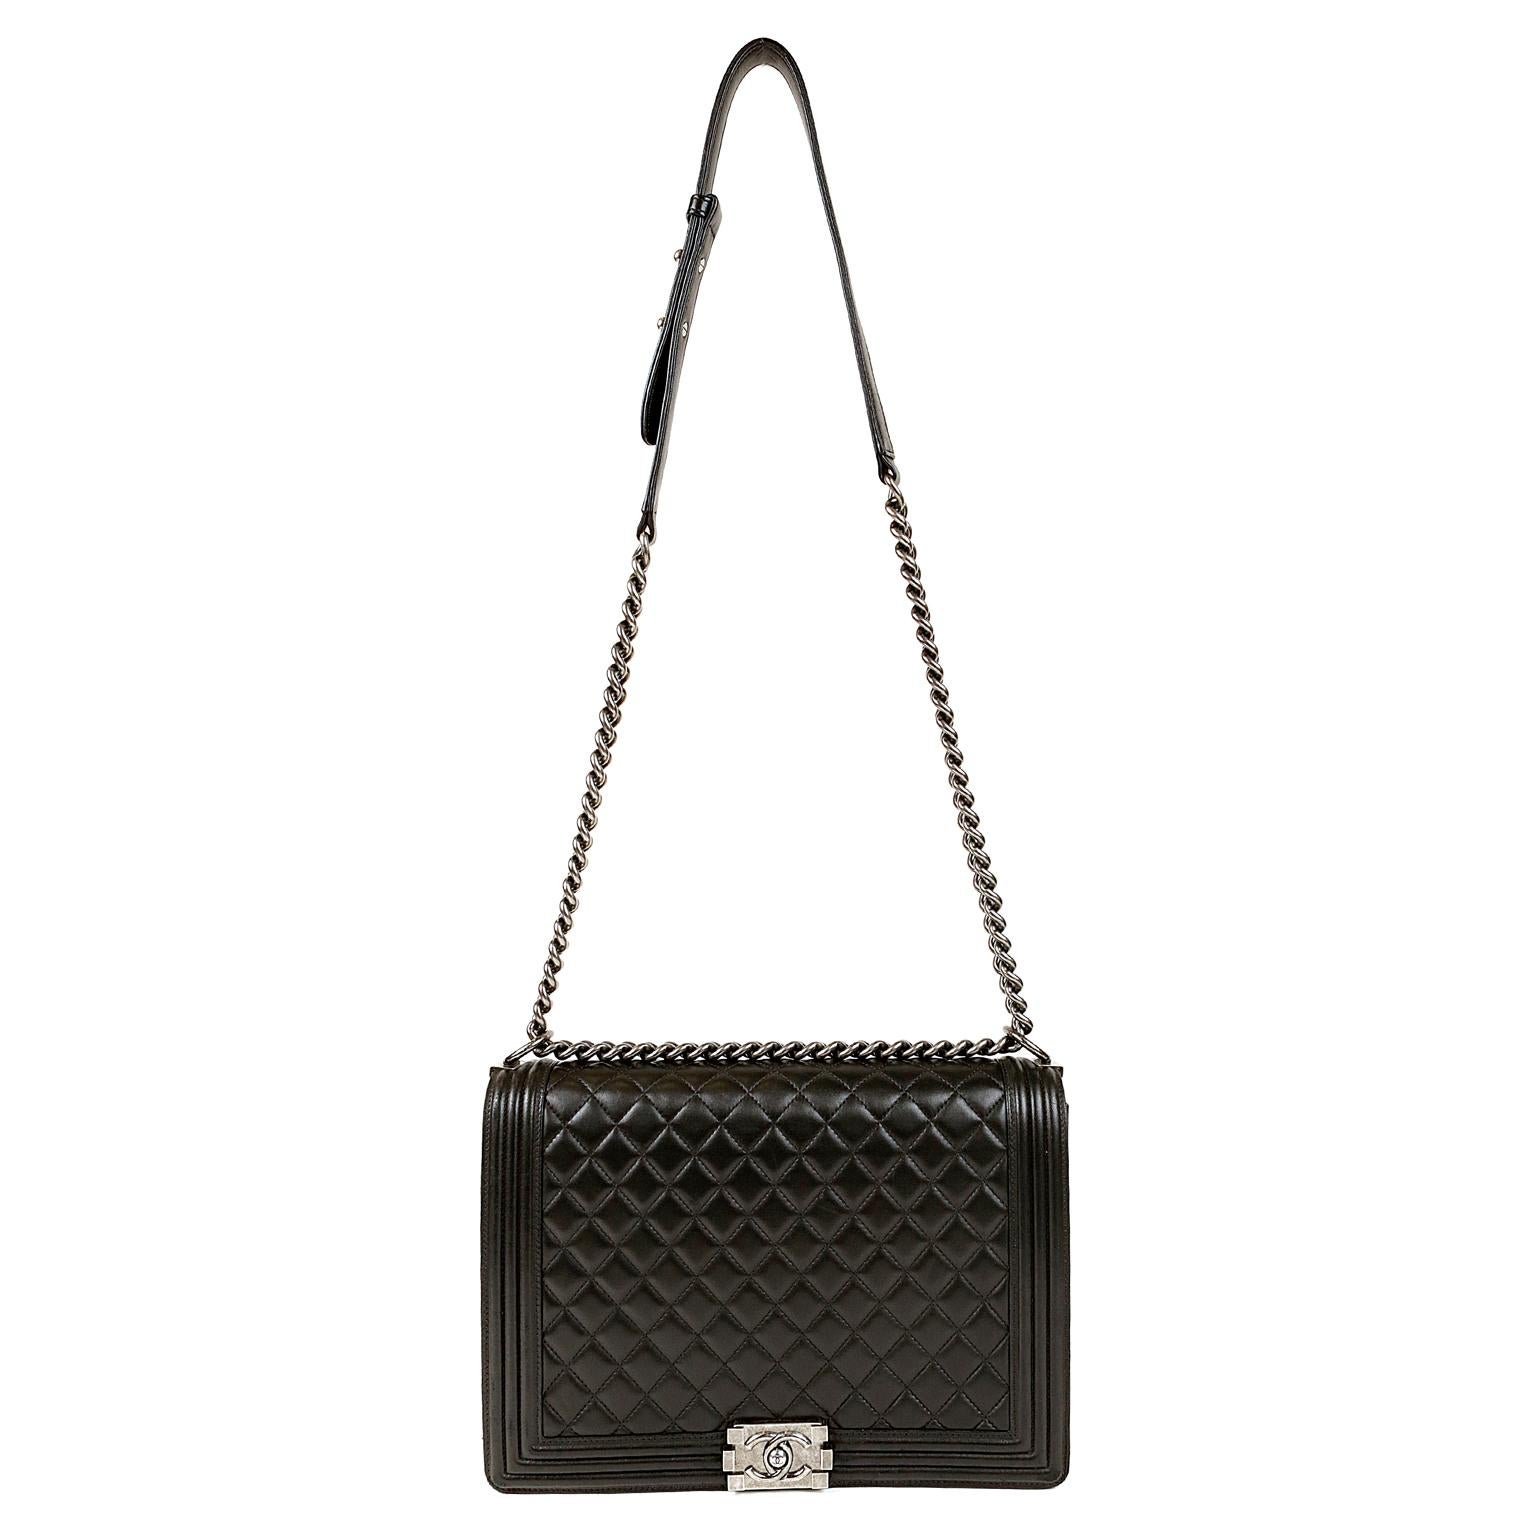 Chanel Black Lambskin Large Boy Bag- PRISTINE; appears never carried.     
The updated design is structured and edgy with a versatility that makes it extremely popular.  
Black lambskin is quilted in signature Chanel diamond stitched pattern.  Boy